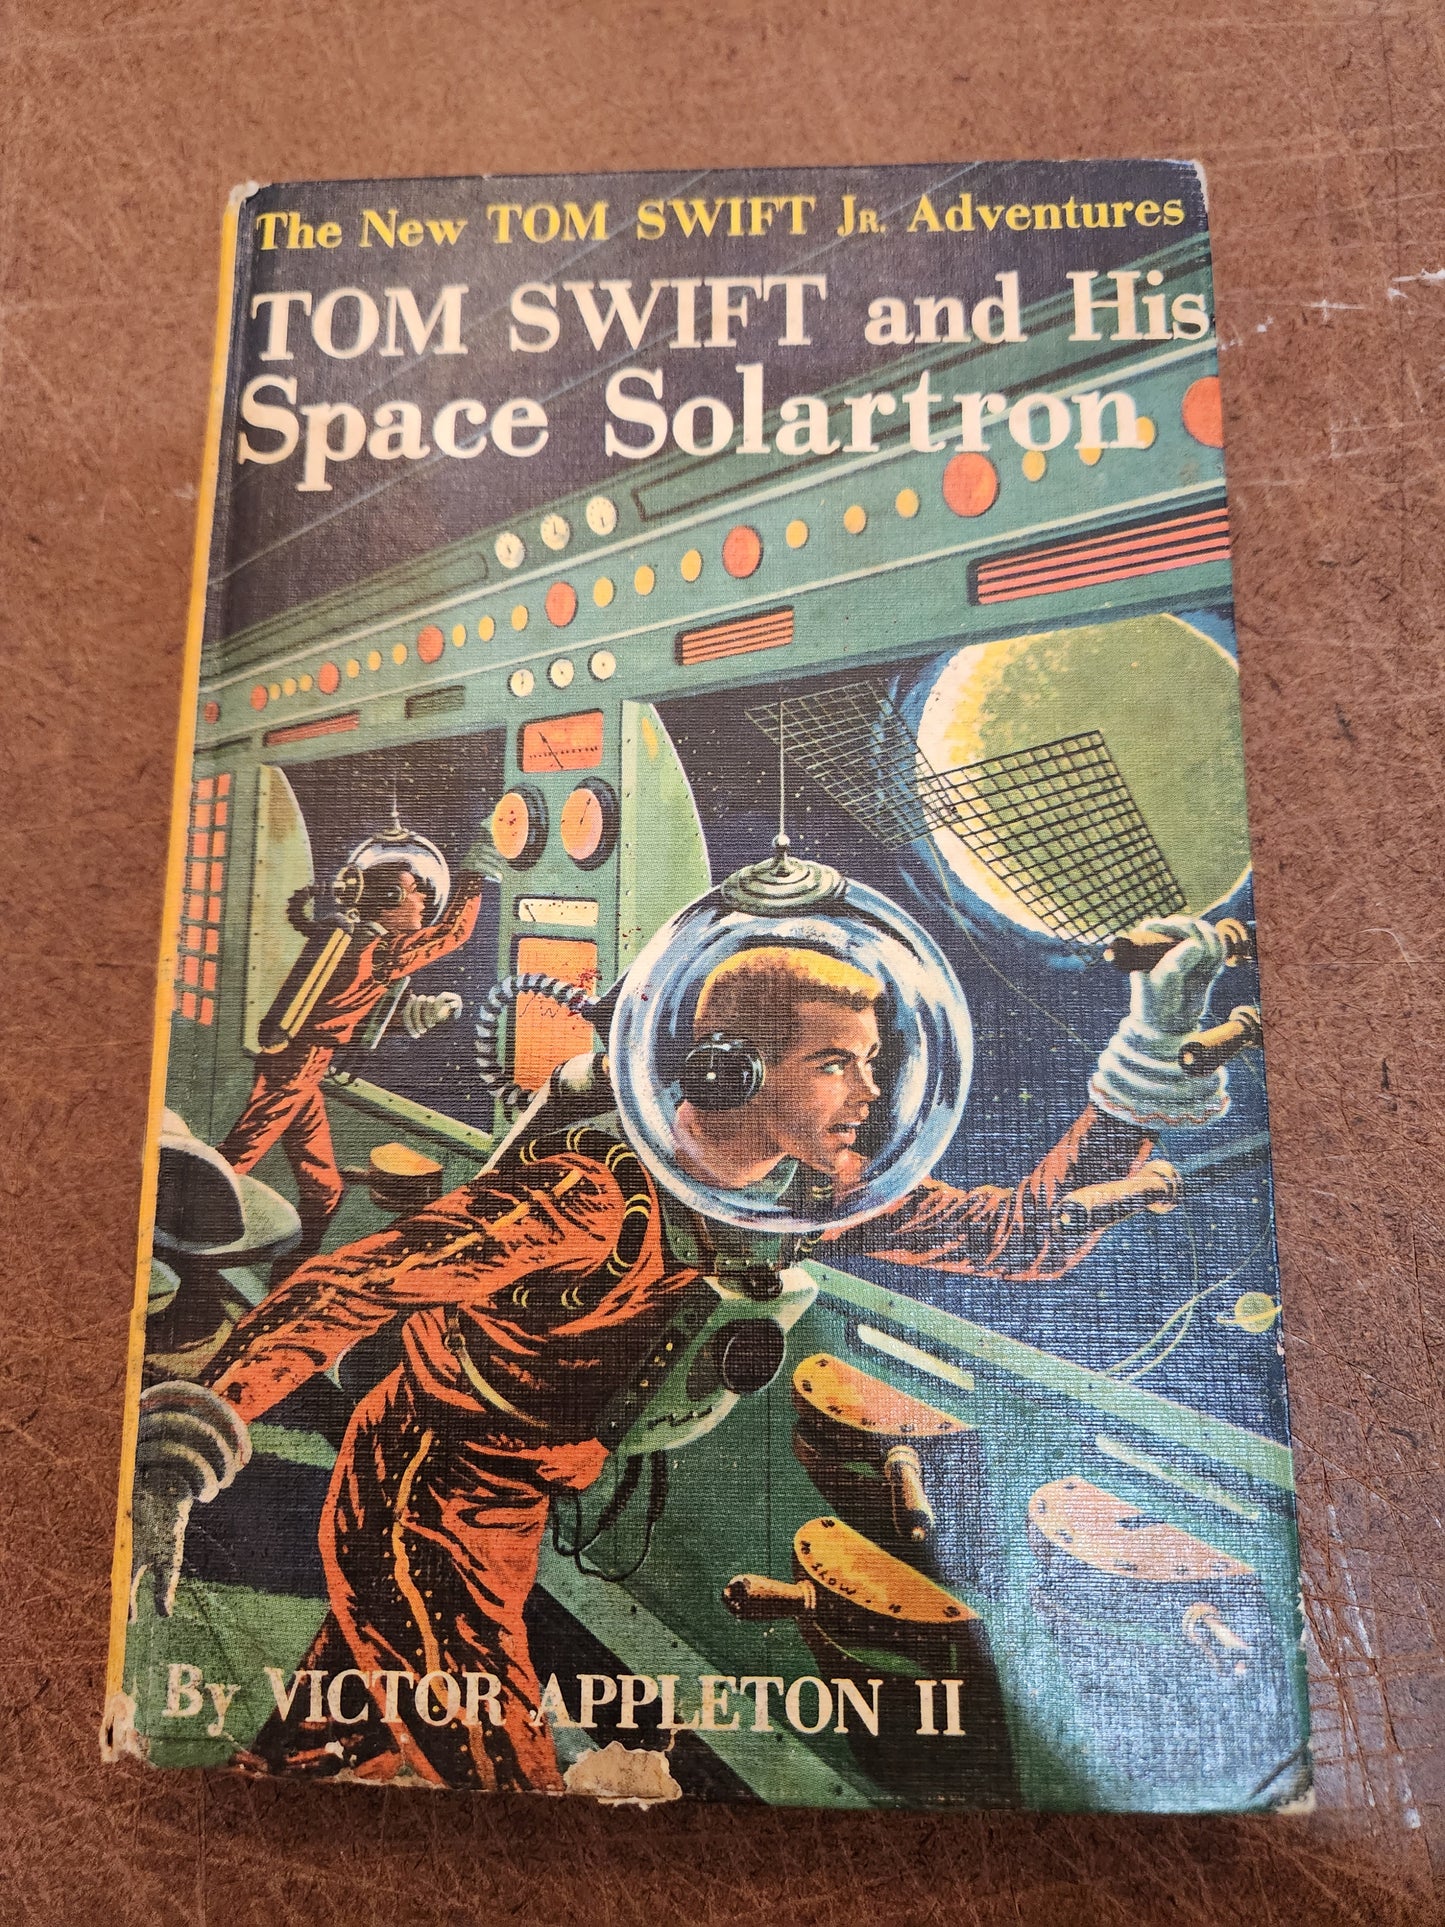 "Tom Swift and His Space Solartron" by Victor Appleton II (Yellow Spine)